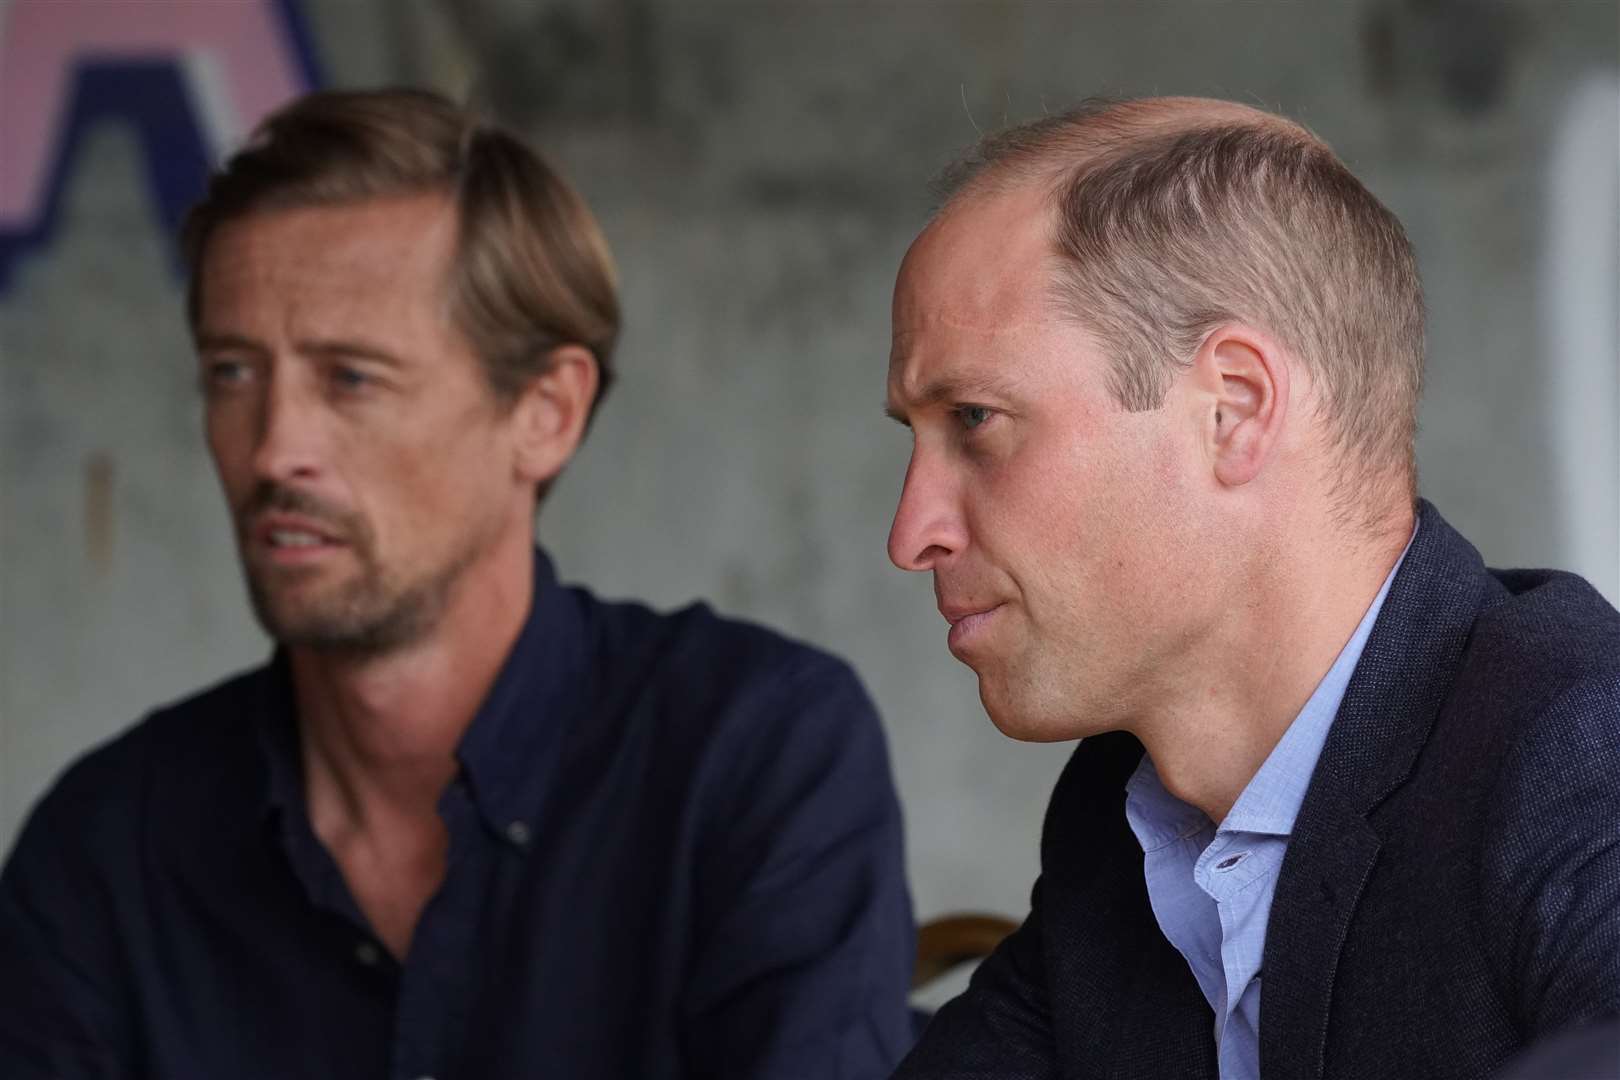 Peter Crouch and William have met a number of times in recent years (Kirsty O’Connor/PA)